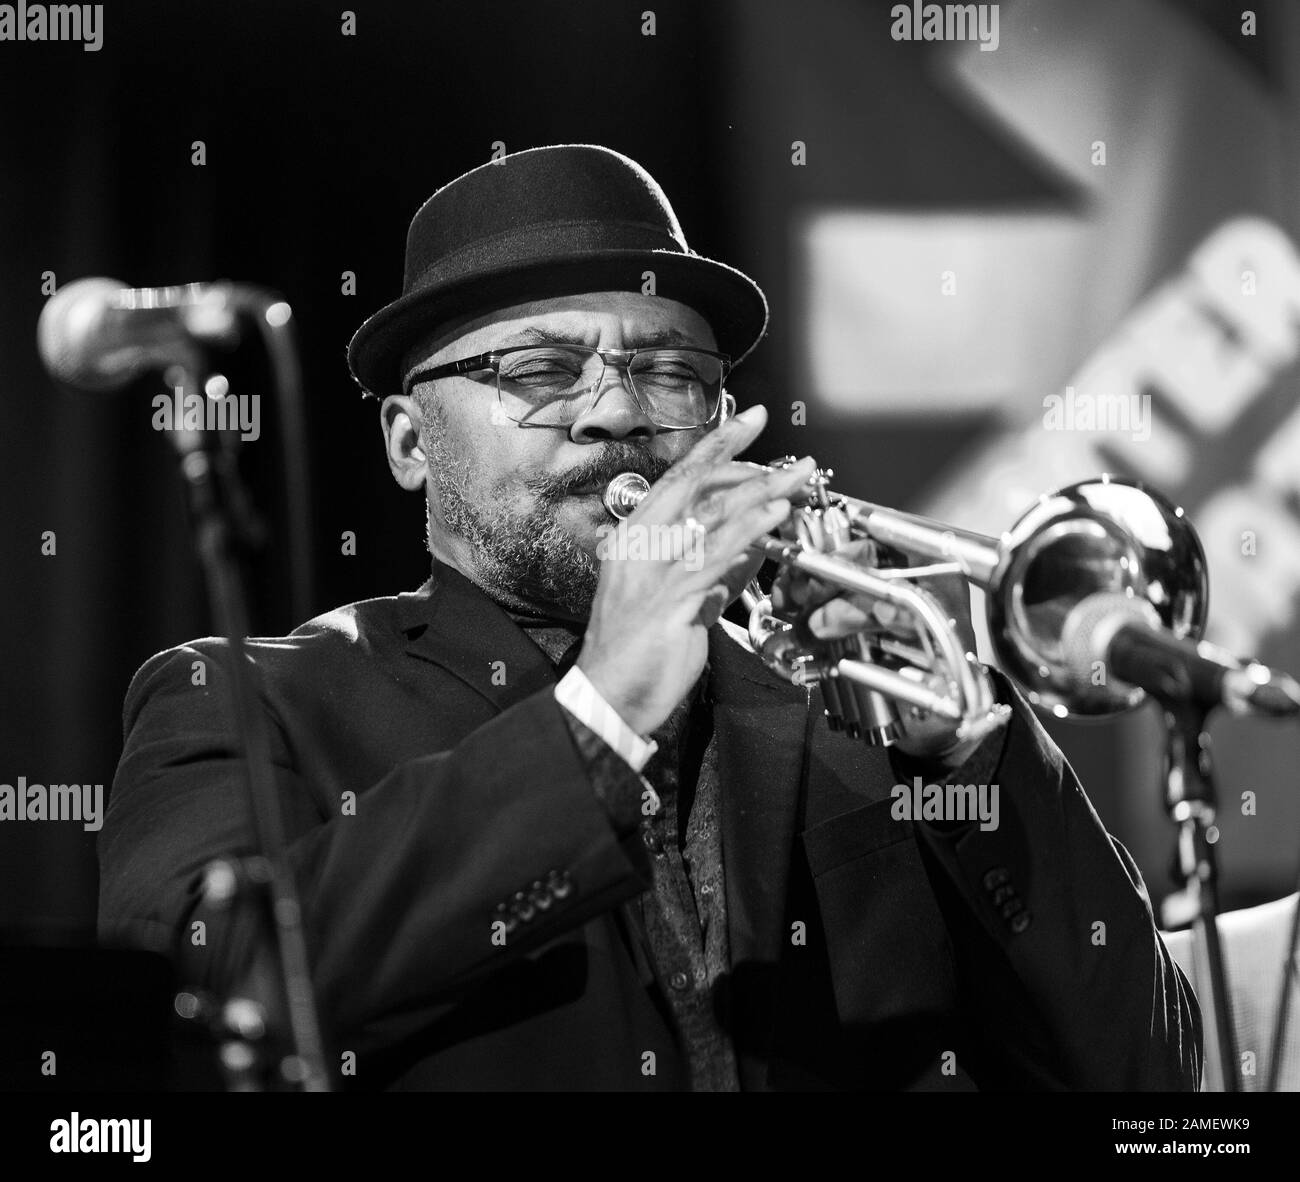 New York, United States. 12th Jan, 2020. Dwight Adams performs during From Detroit to the World concert celebrating Marcus Belgrave as part of Winter Jazz Festival at (le) Poisson Rouge (Photo by Lev Radin/Pacific Press) Credit: Pacific Press Agency/Alamy Live News Stock Photo